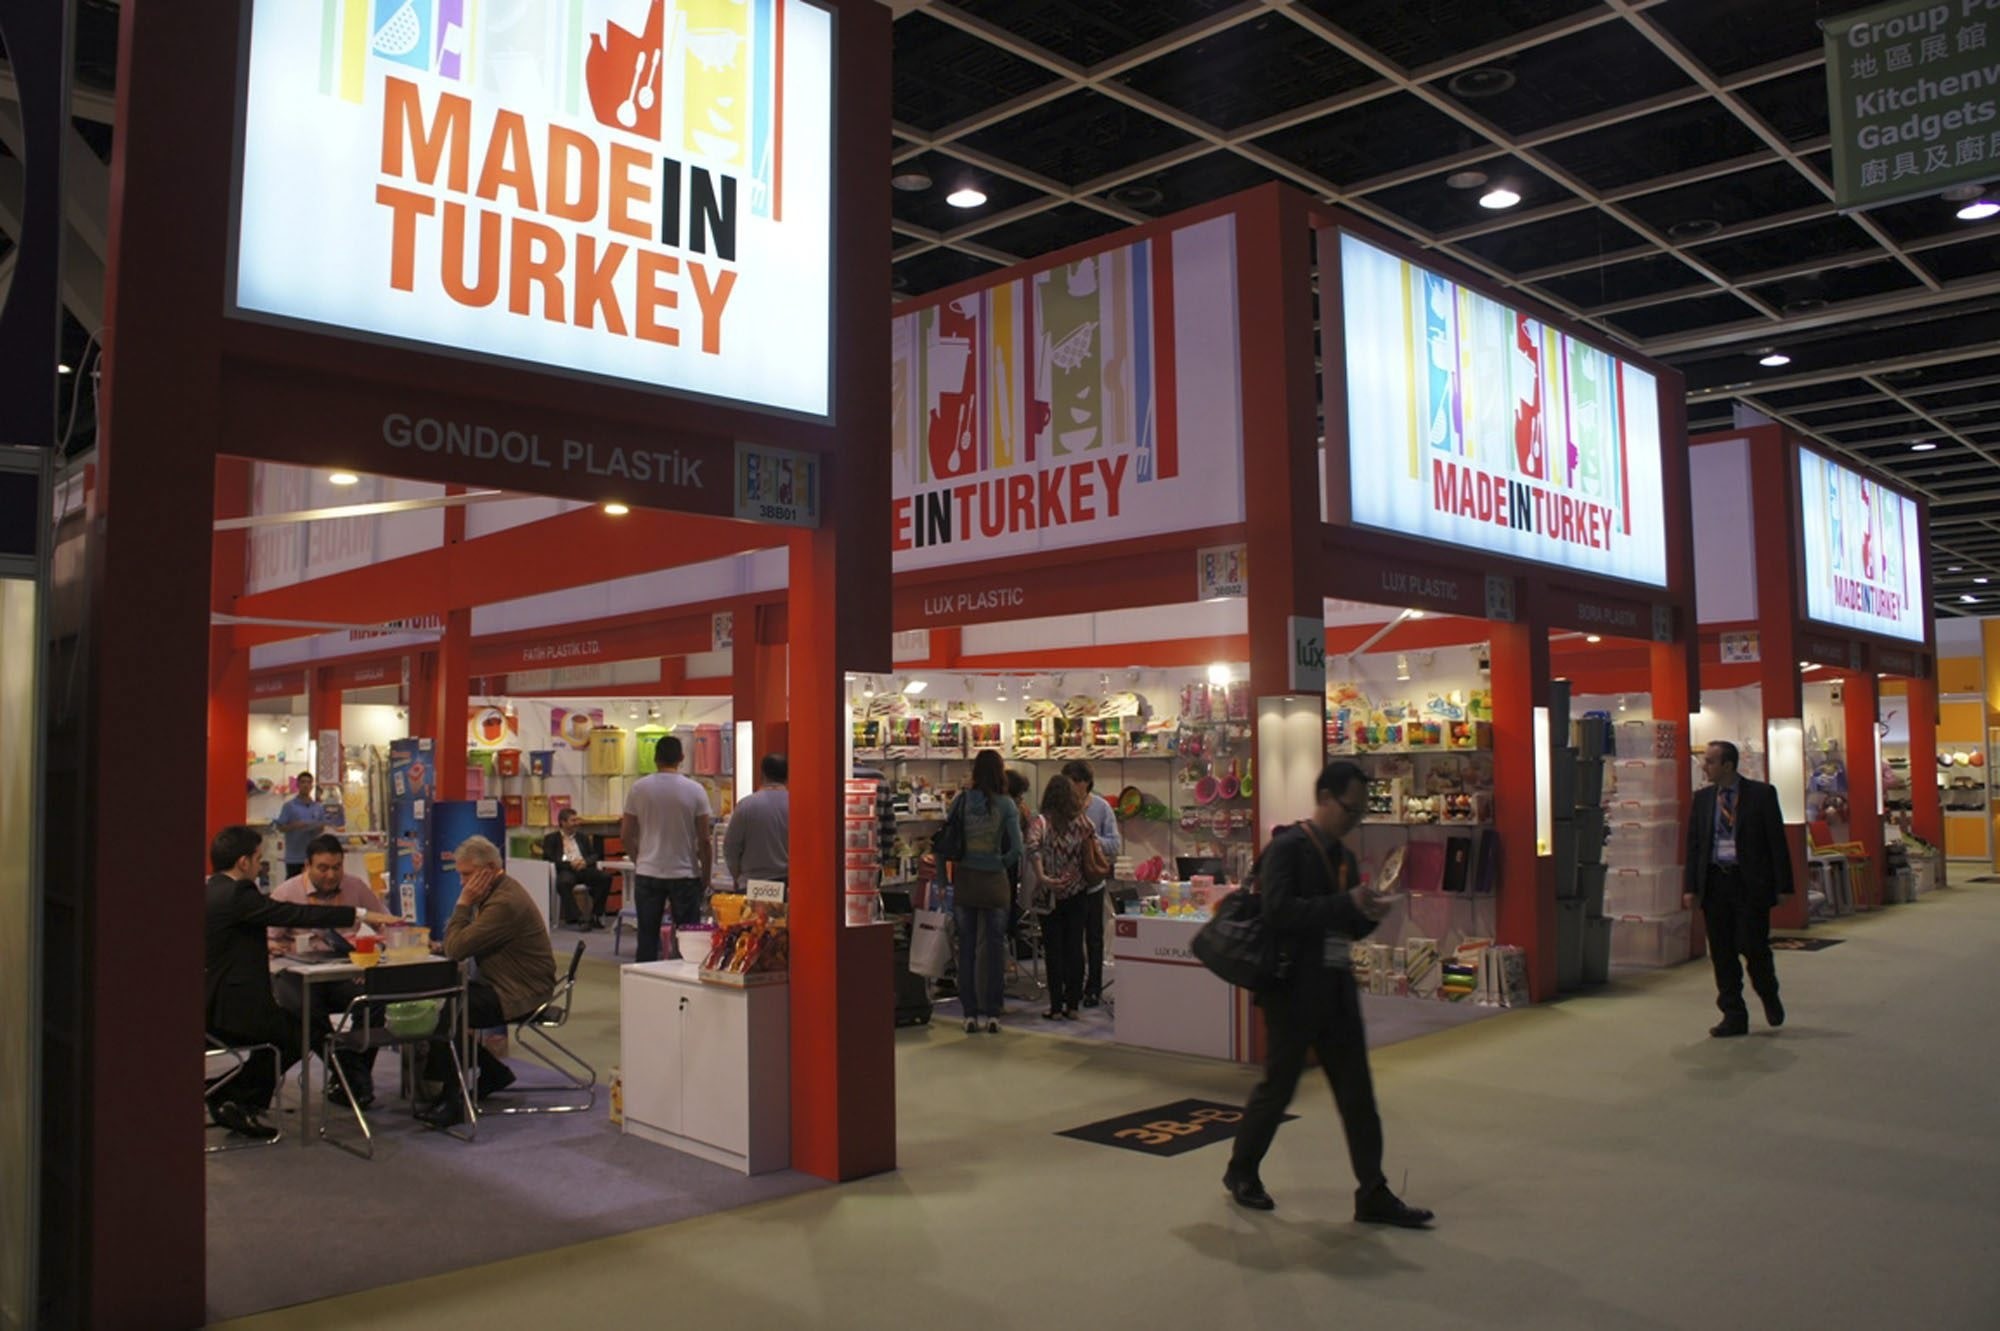 Turkish products exhibited at a fair in Hong Kong.